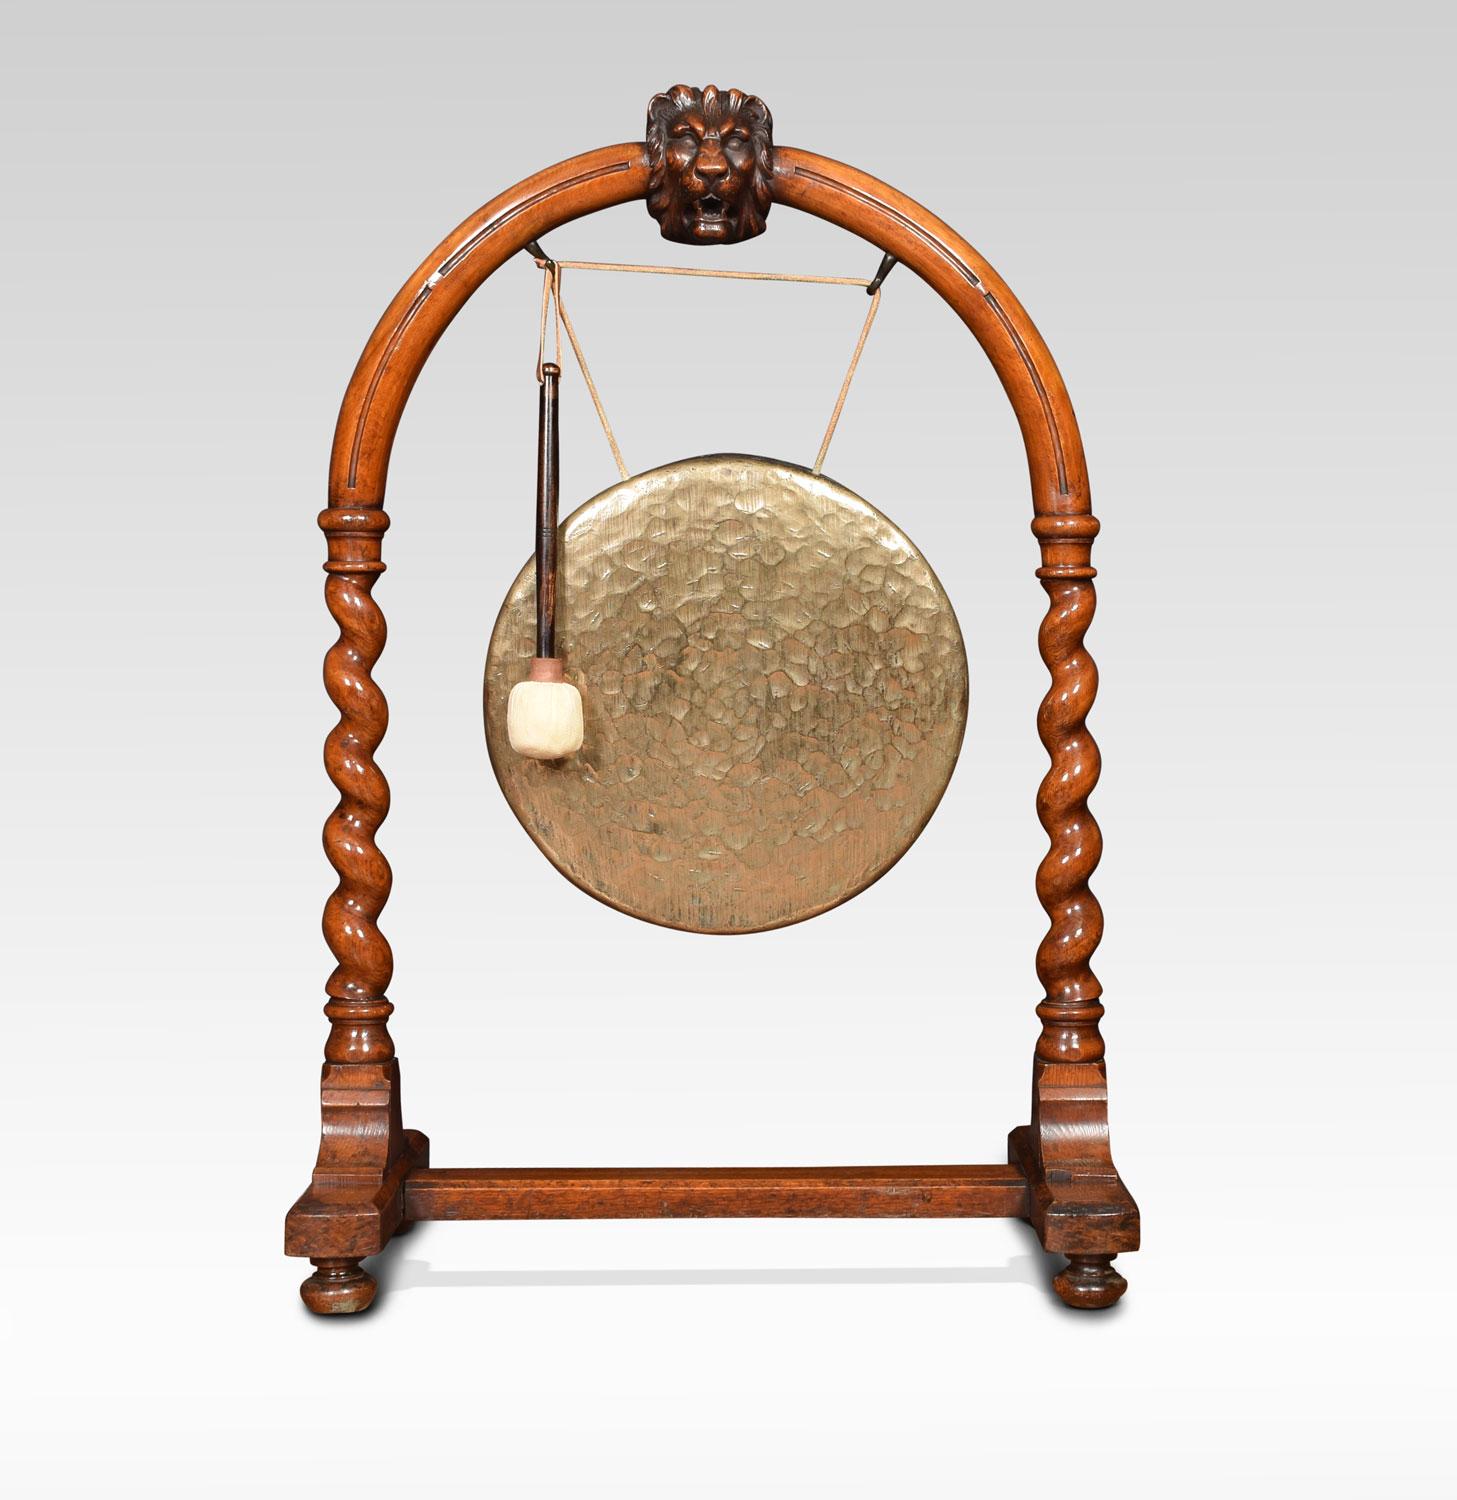 19th century walnut dinner gong and beater. The arched top with carved lion’s mask above barley twist supports. Having suspended brass gong to centre. All raised up on trestle base terminating in bun feet.
Dimensions
Height 41 Inches
Width 27.5